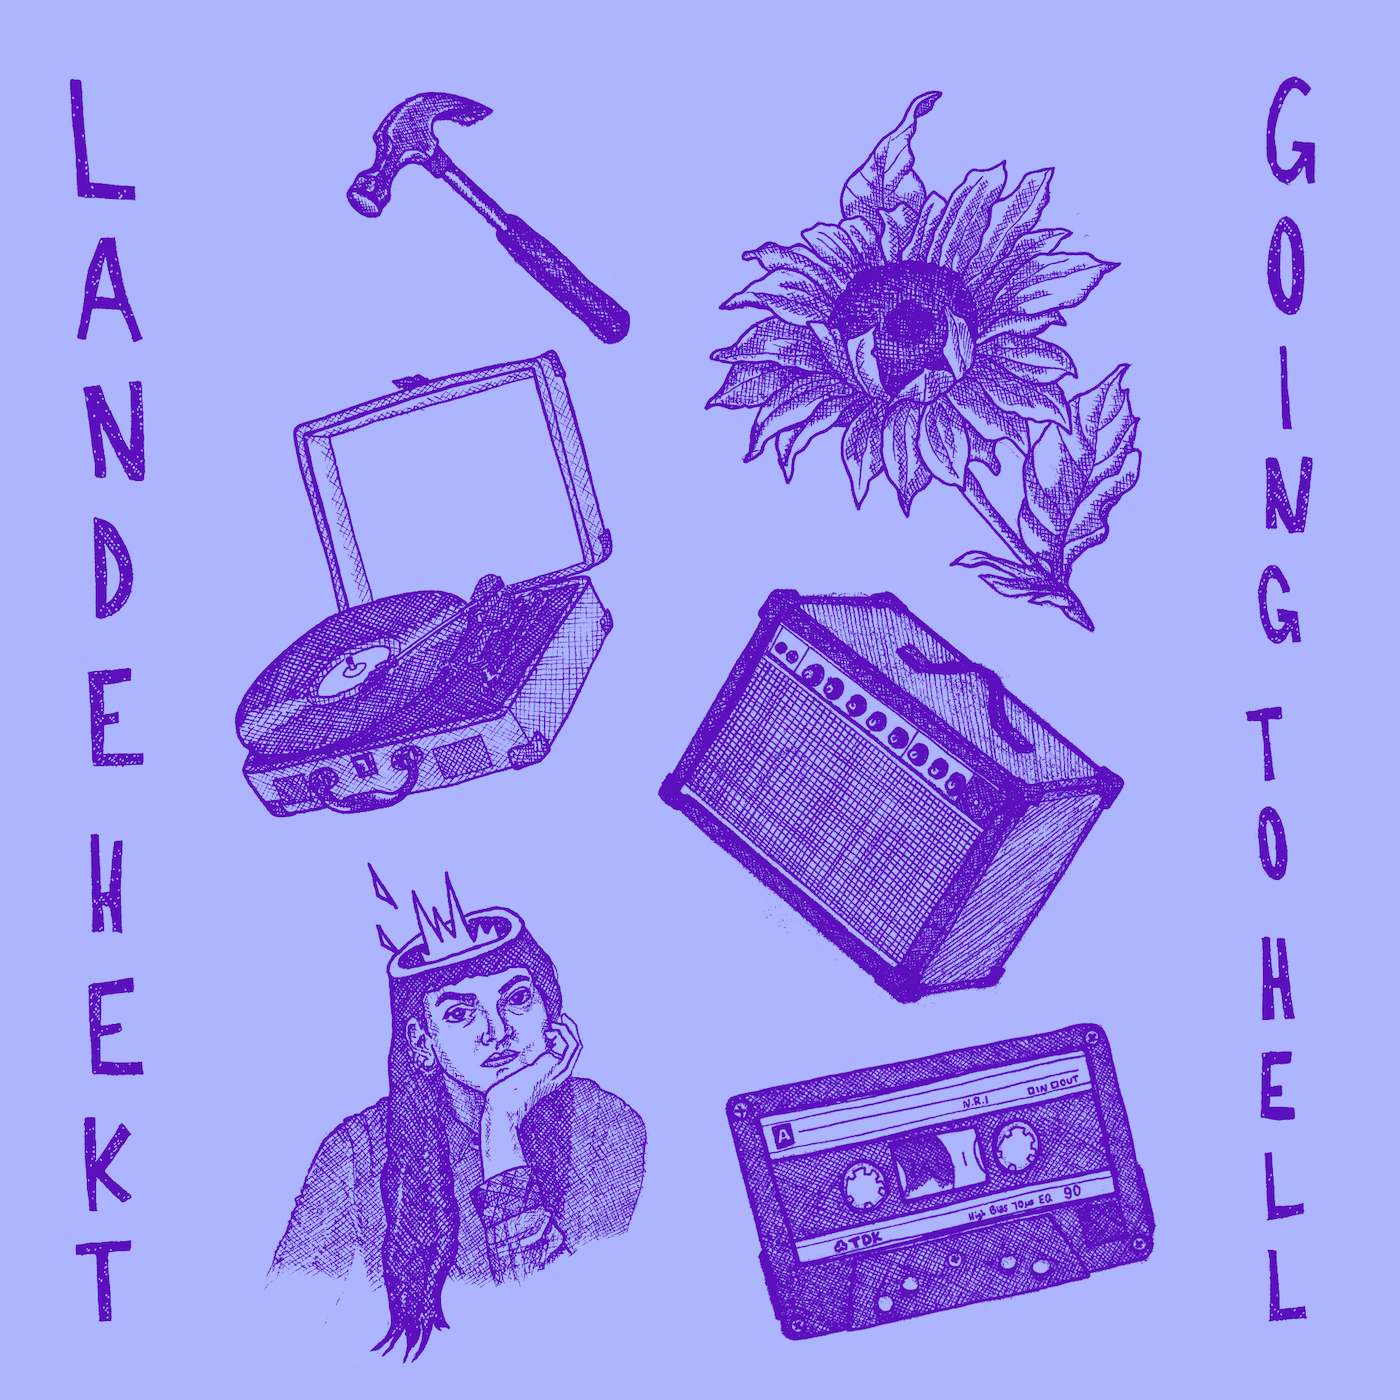 Reseña: LANDE HEKT- «GOING TO HELL» (2021)